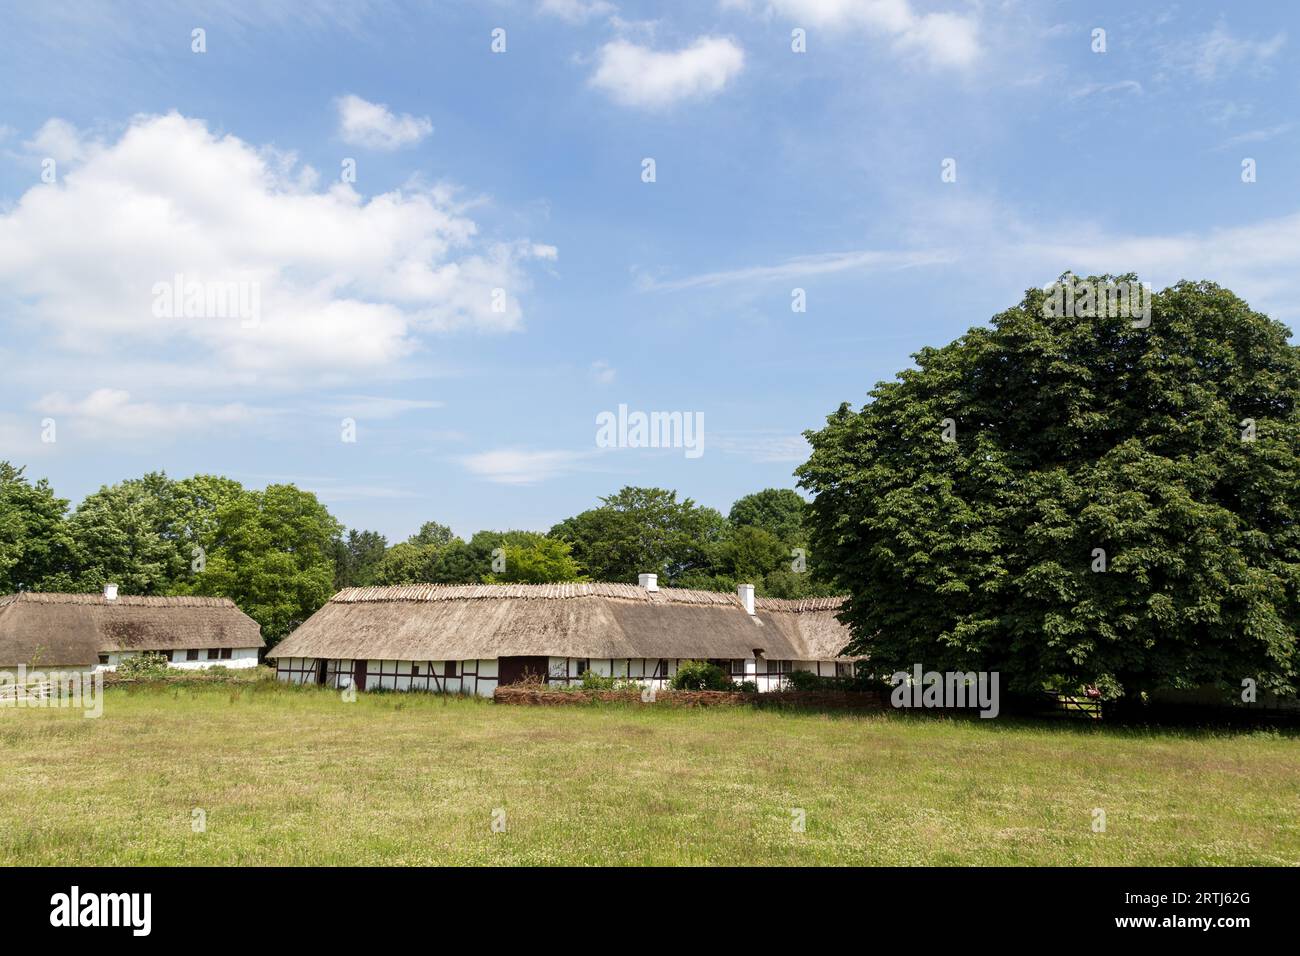 Lyngby, Denmark, June 23, 2016: Ancient danish half-timbered farmhouses with straw roof Stock Photo